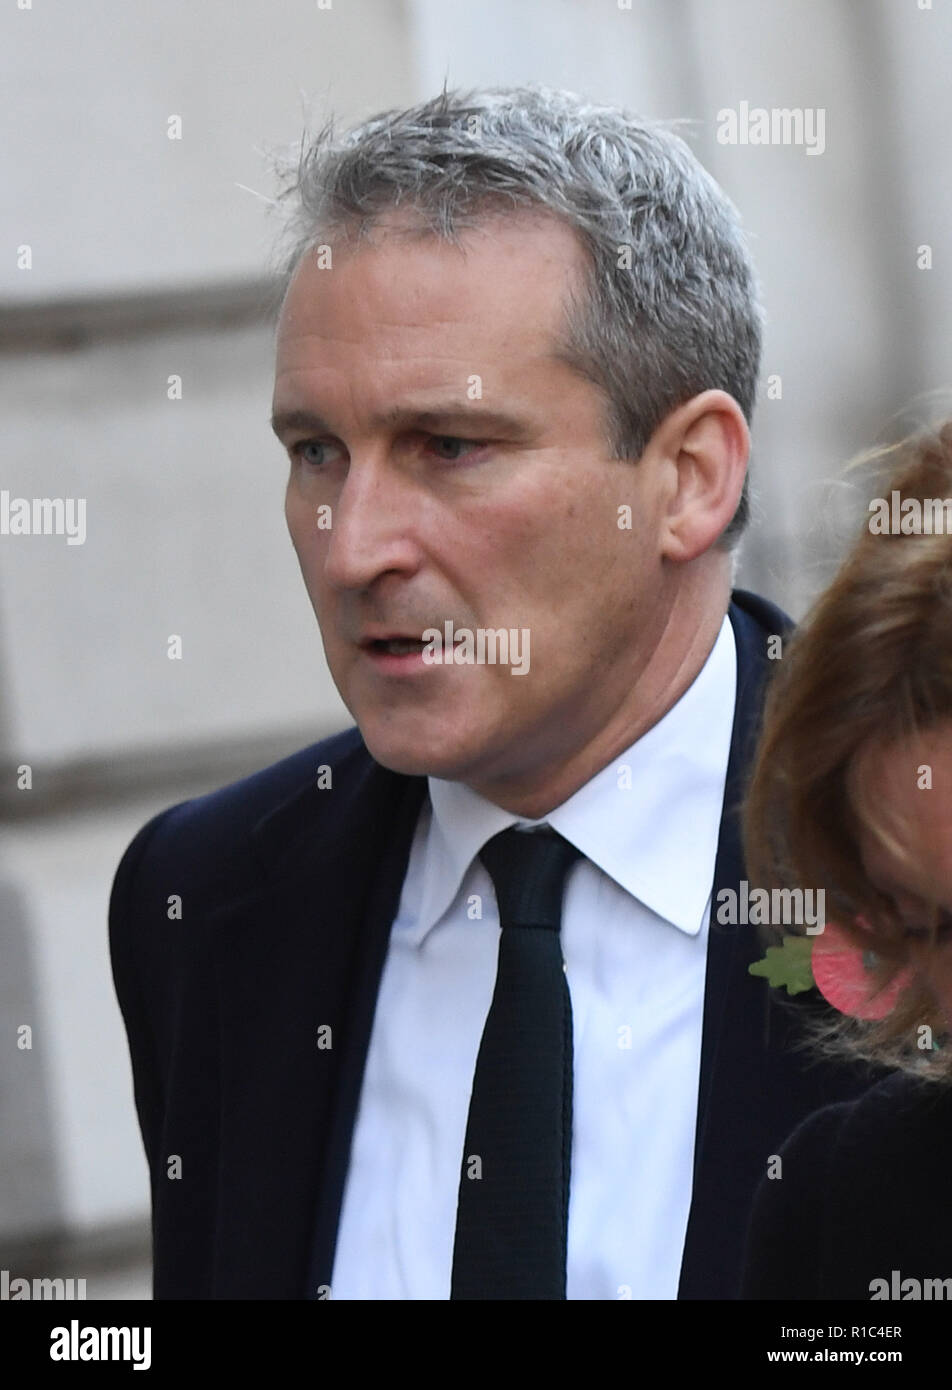 Education Secretary Damian Hinds walks through Downing Street ahead of the remembrance service at the Cenotaph memorial in Whitehall, central London, on the 100th anniversary of the signing of the Armistice which marked the end of the First World War. Stock Photo